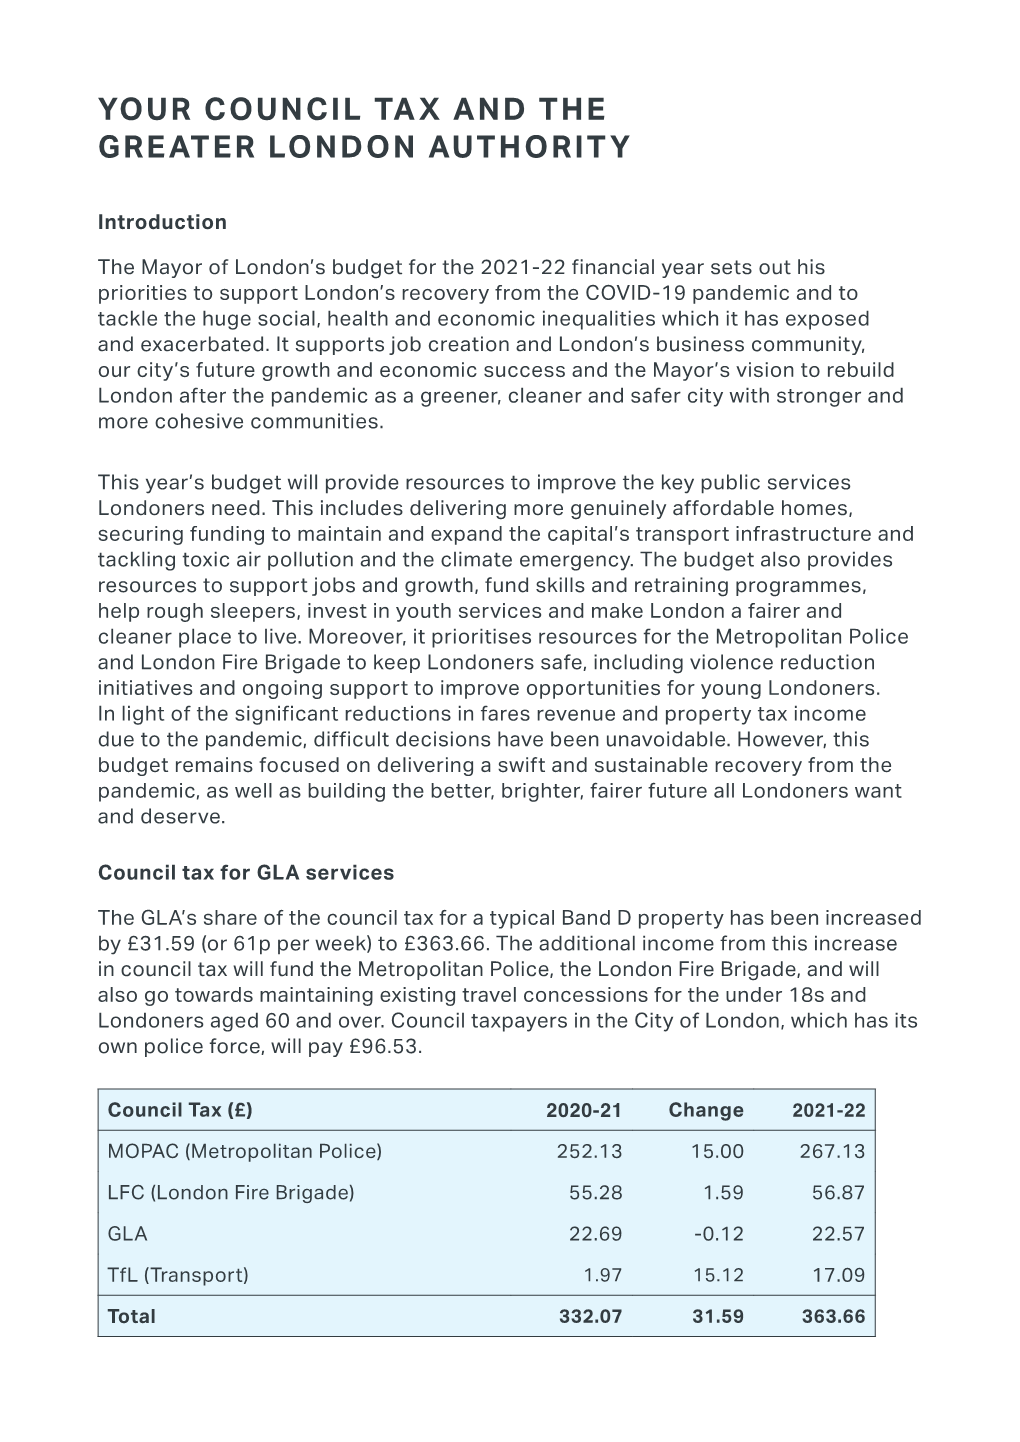 Your Council Tax and the Greater London Authority 2021-22